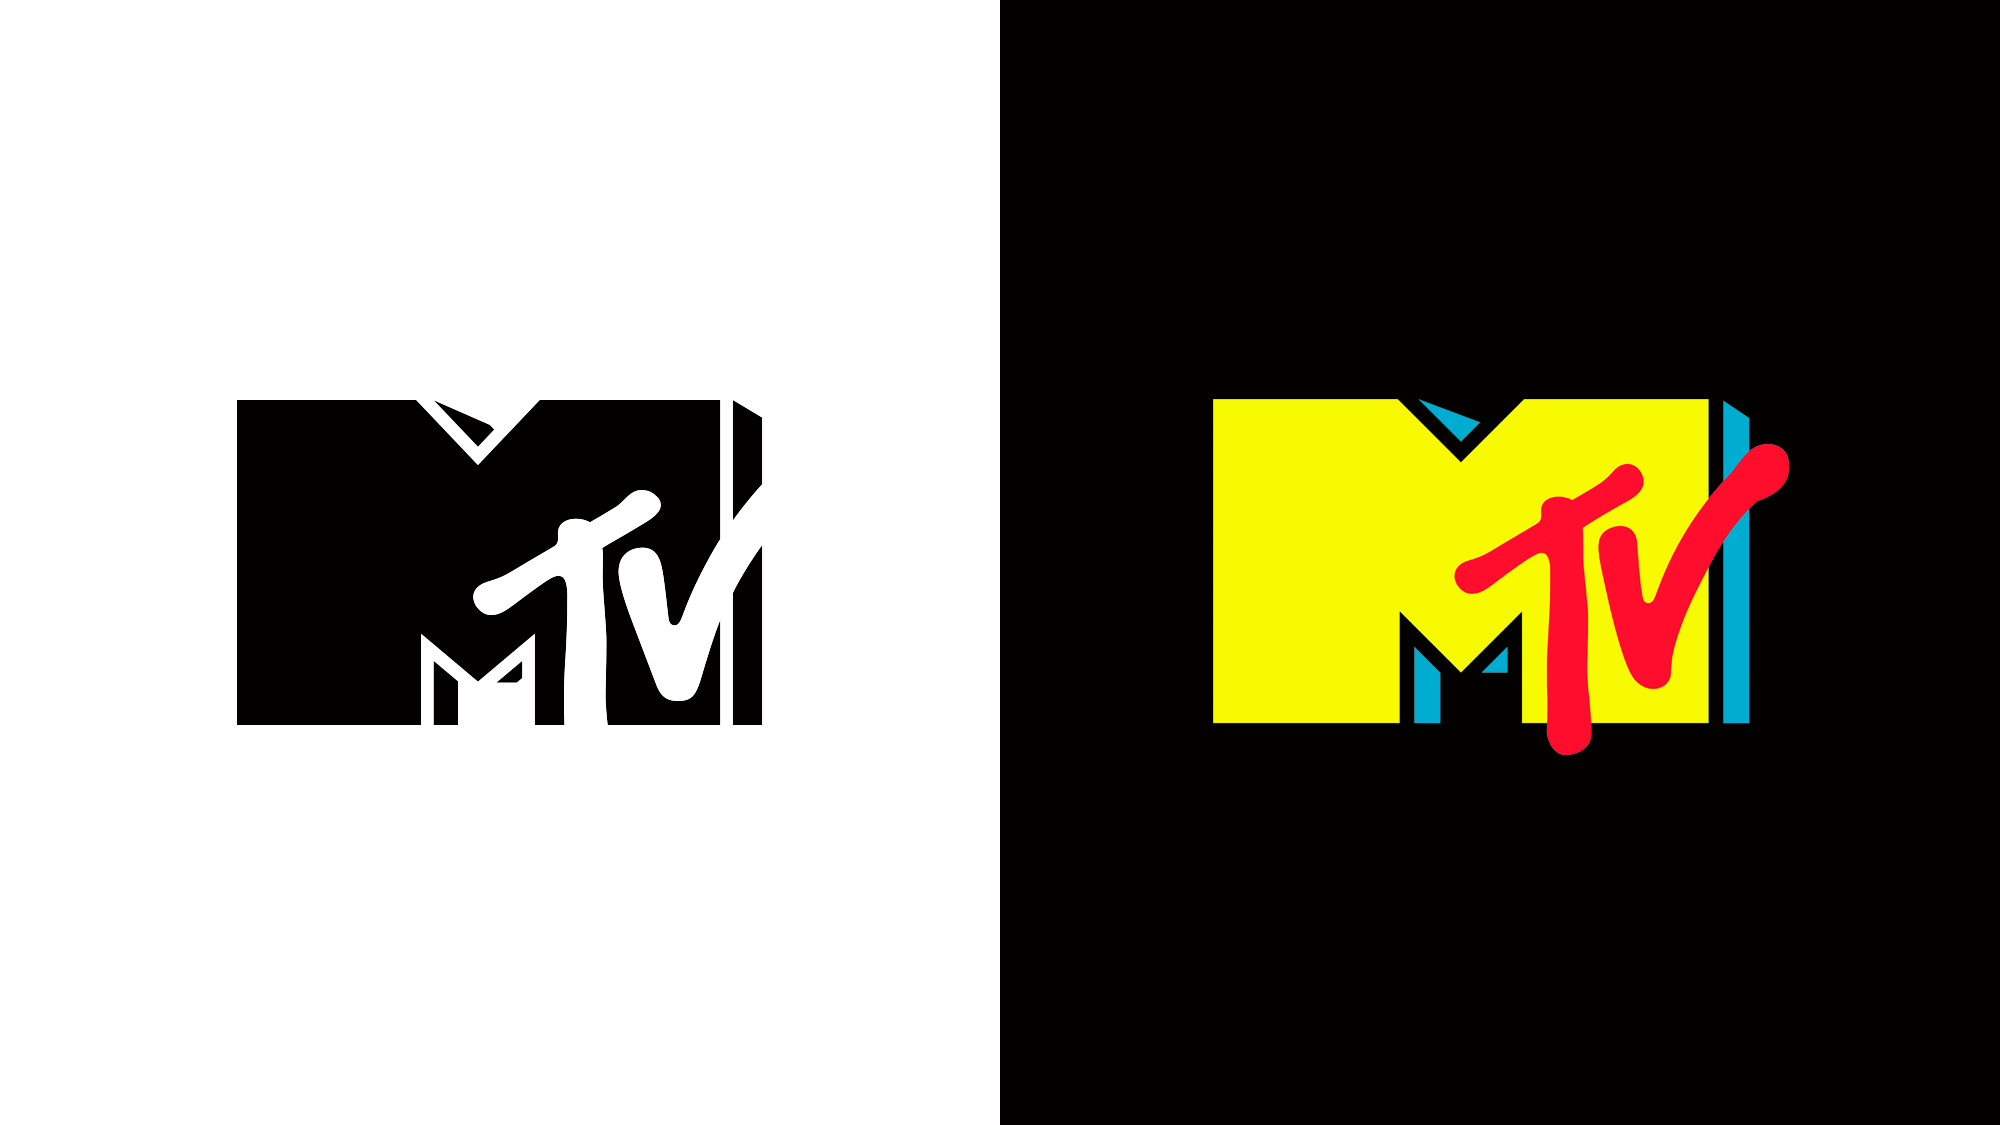 New Logo, Identity, and On-air Look for MTV by loyalkaspar